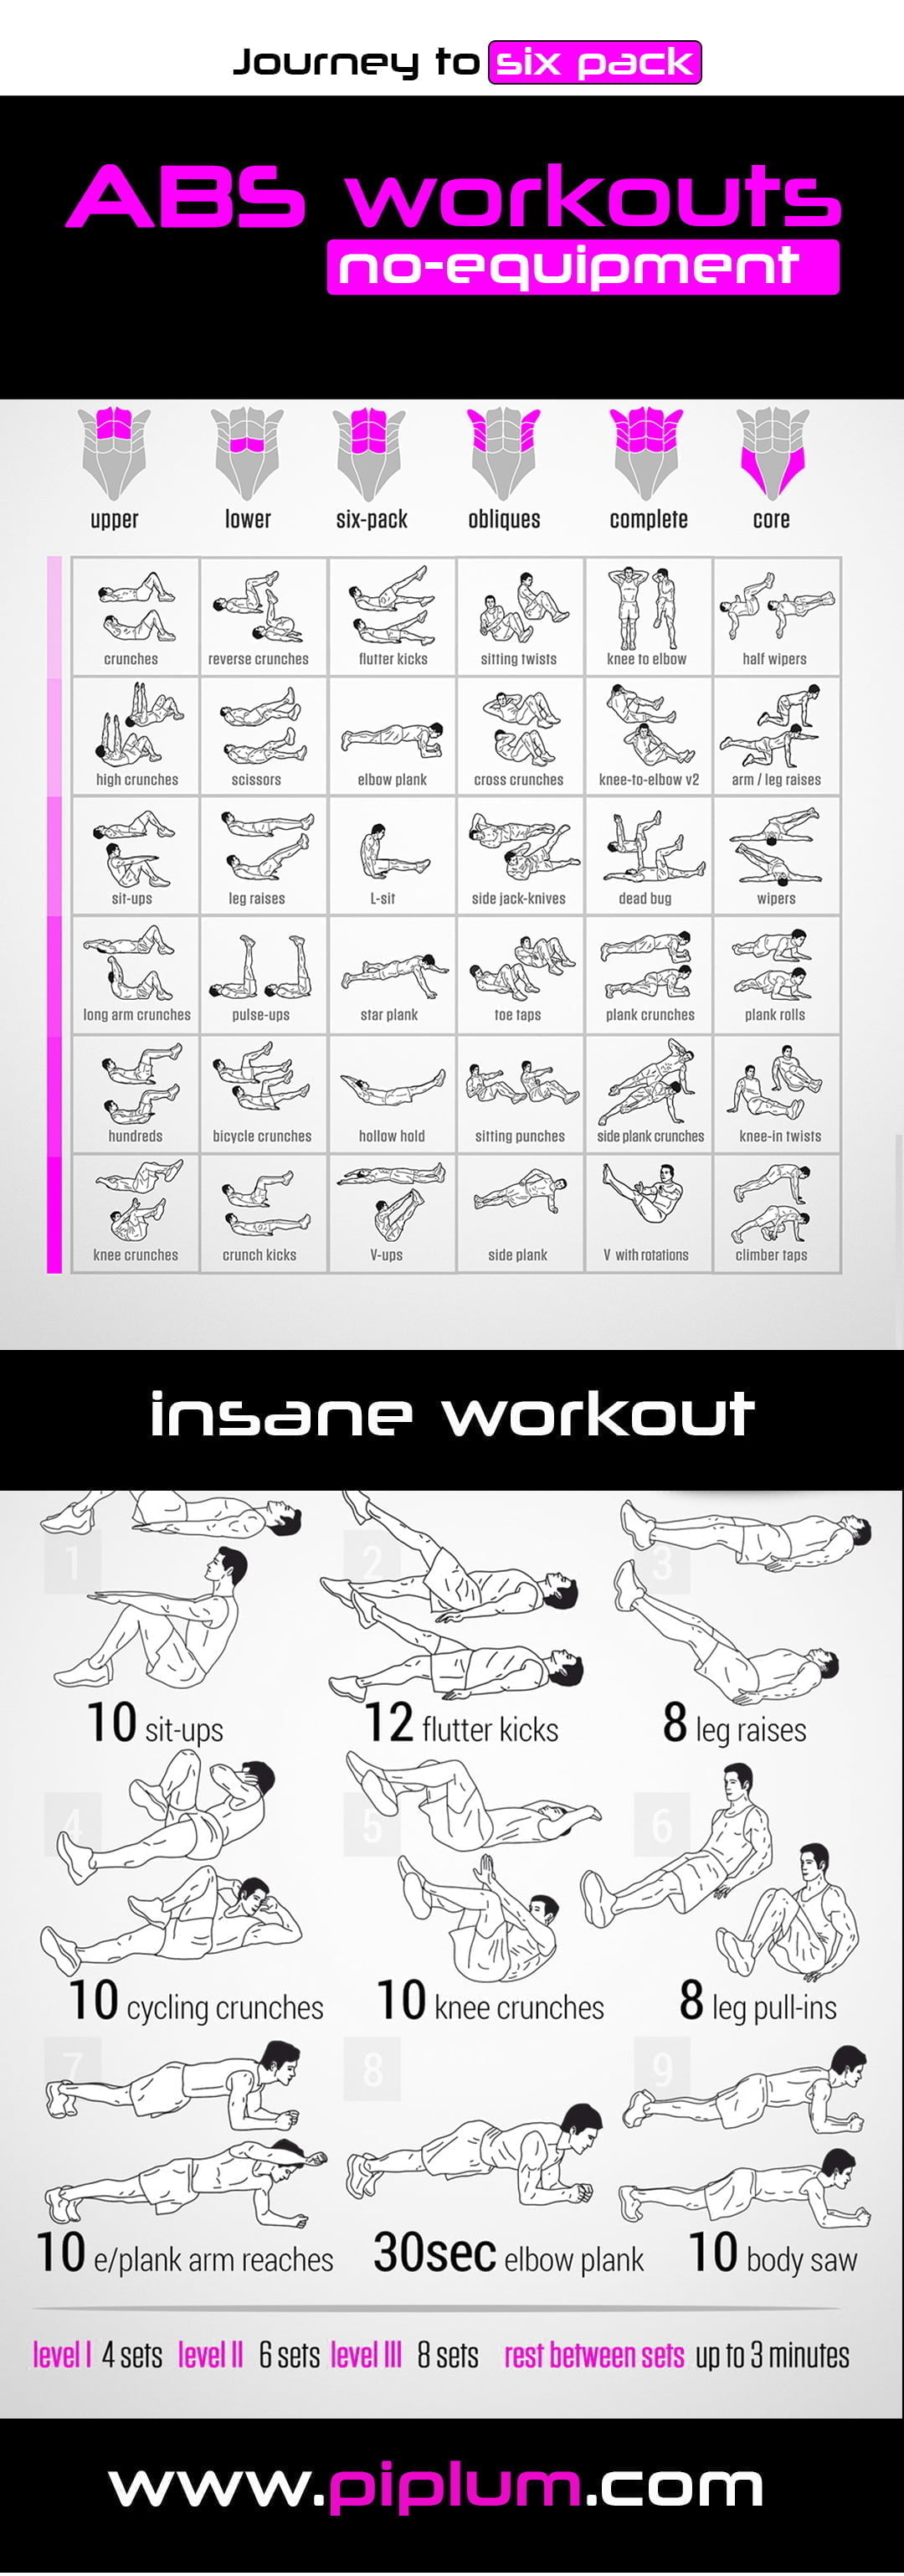 Best-six-pack-workouts-infogrphic